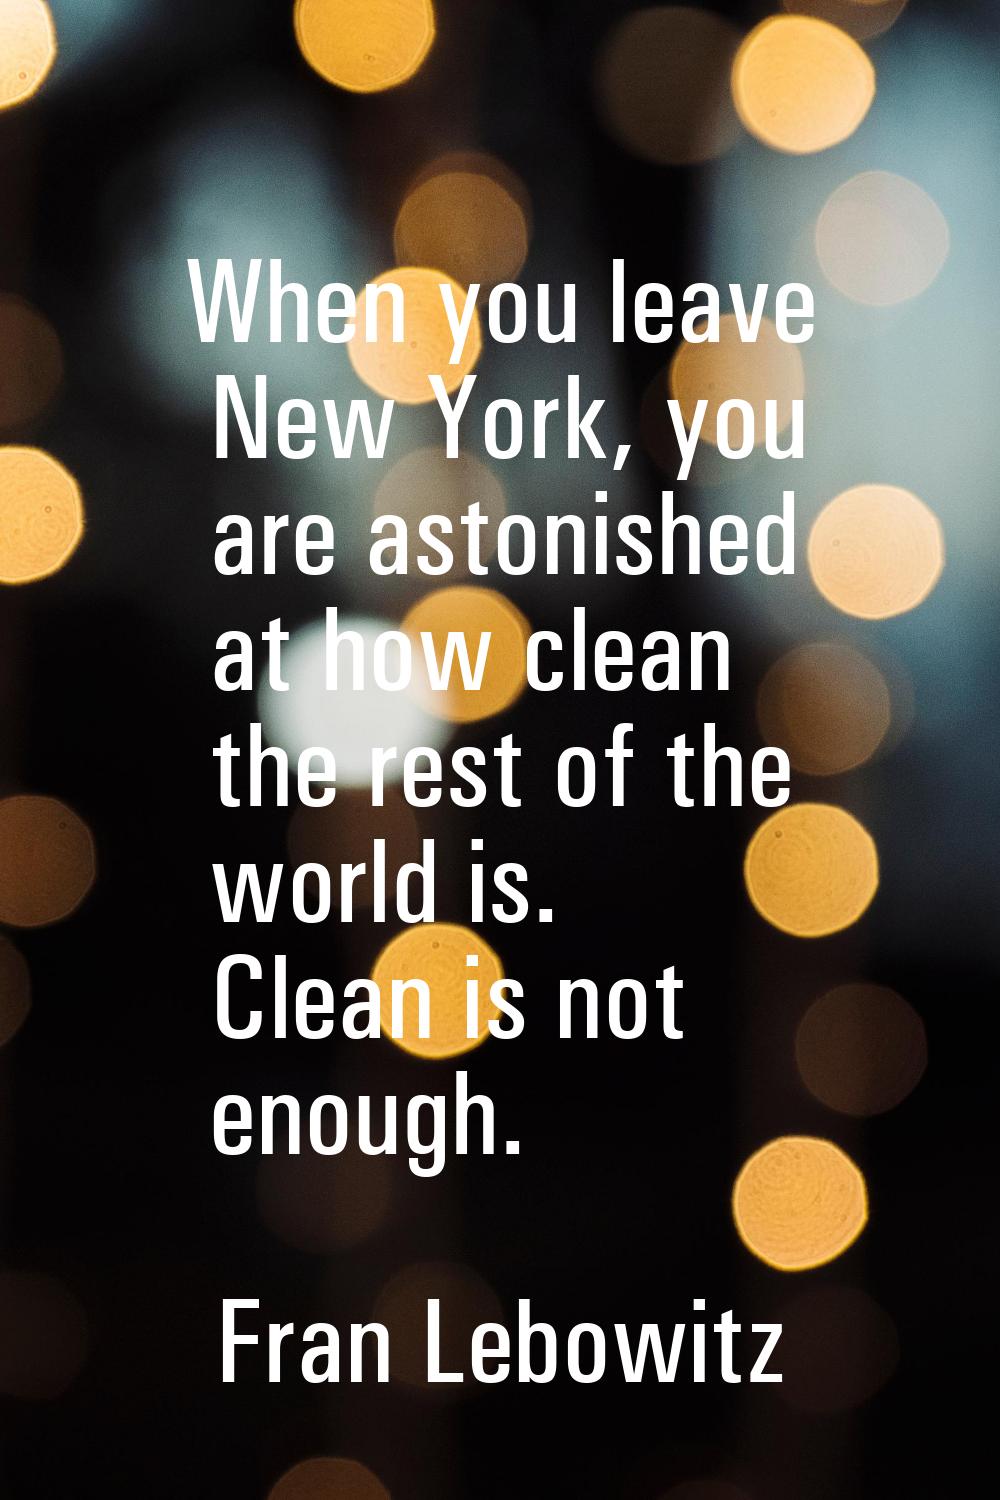 When you leave New York, you are astonished at how clean the rest of the world is. Clean is not eno